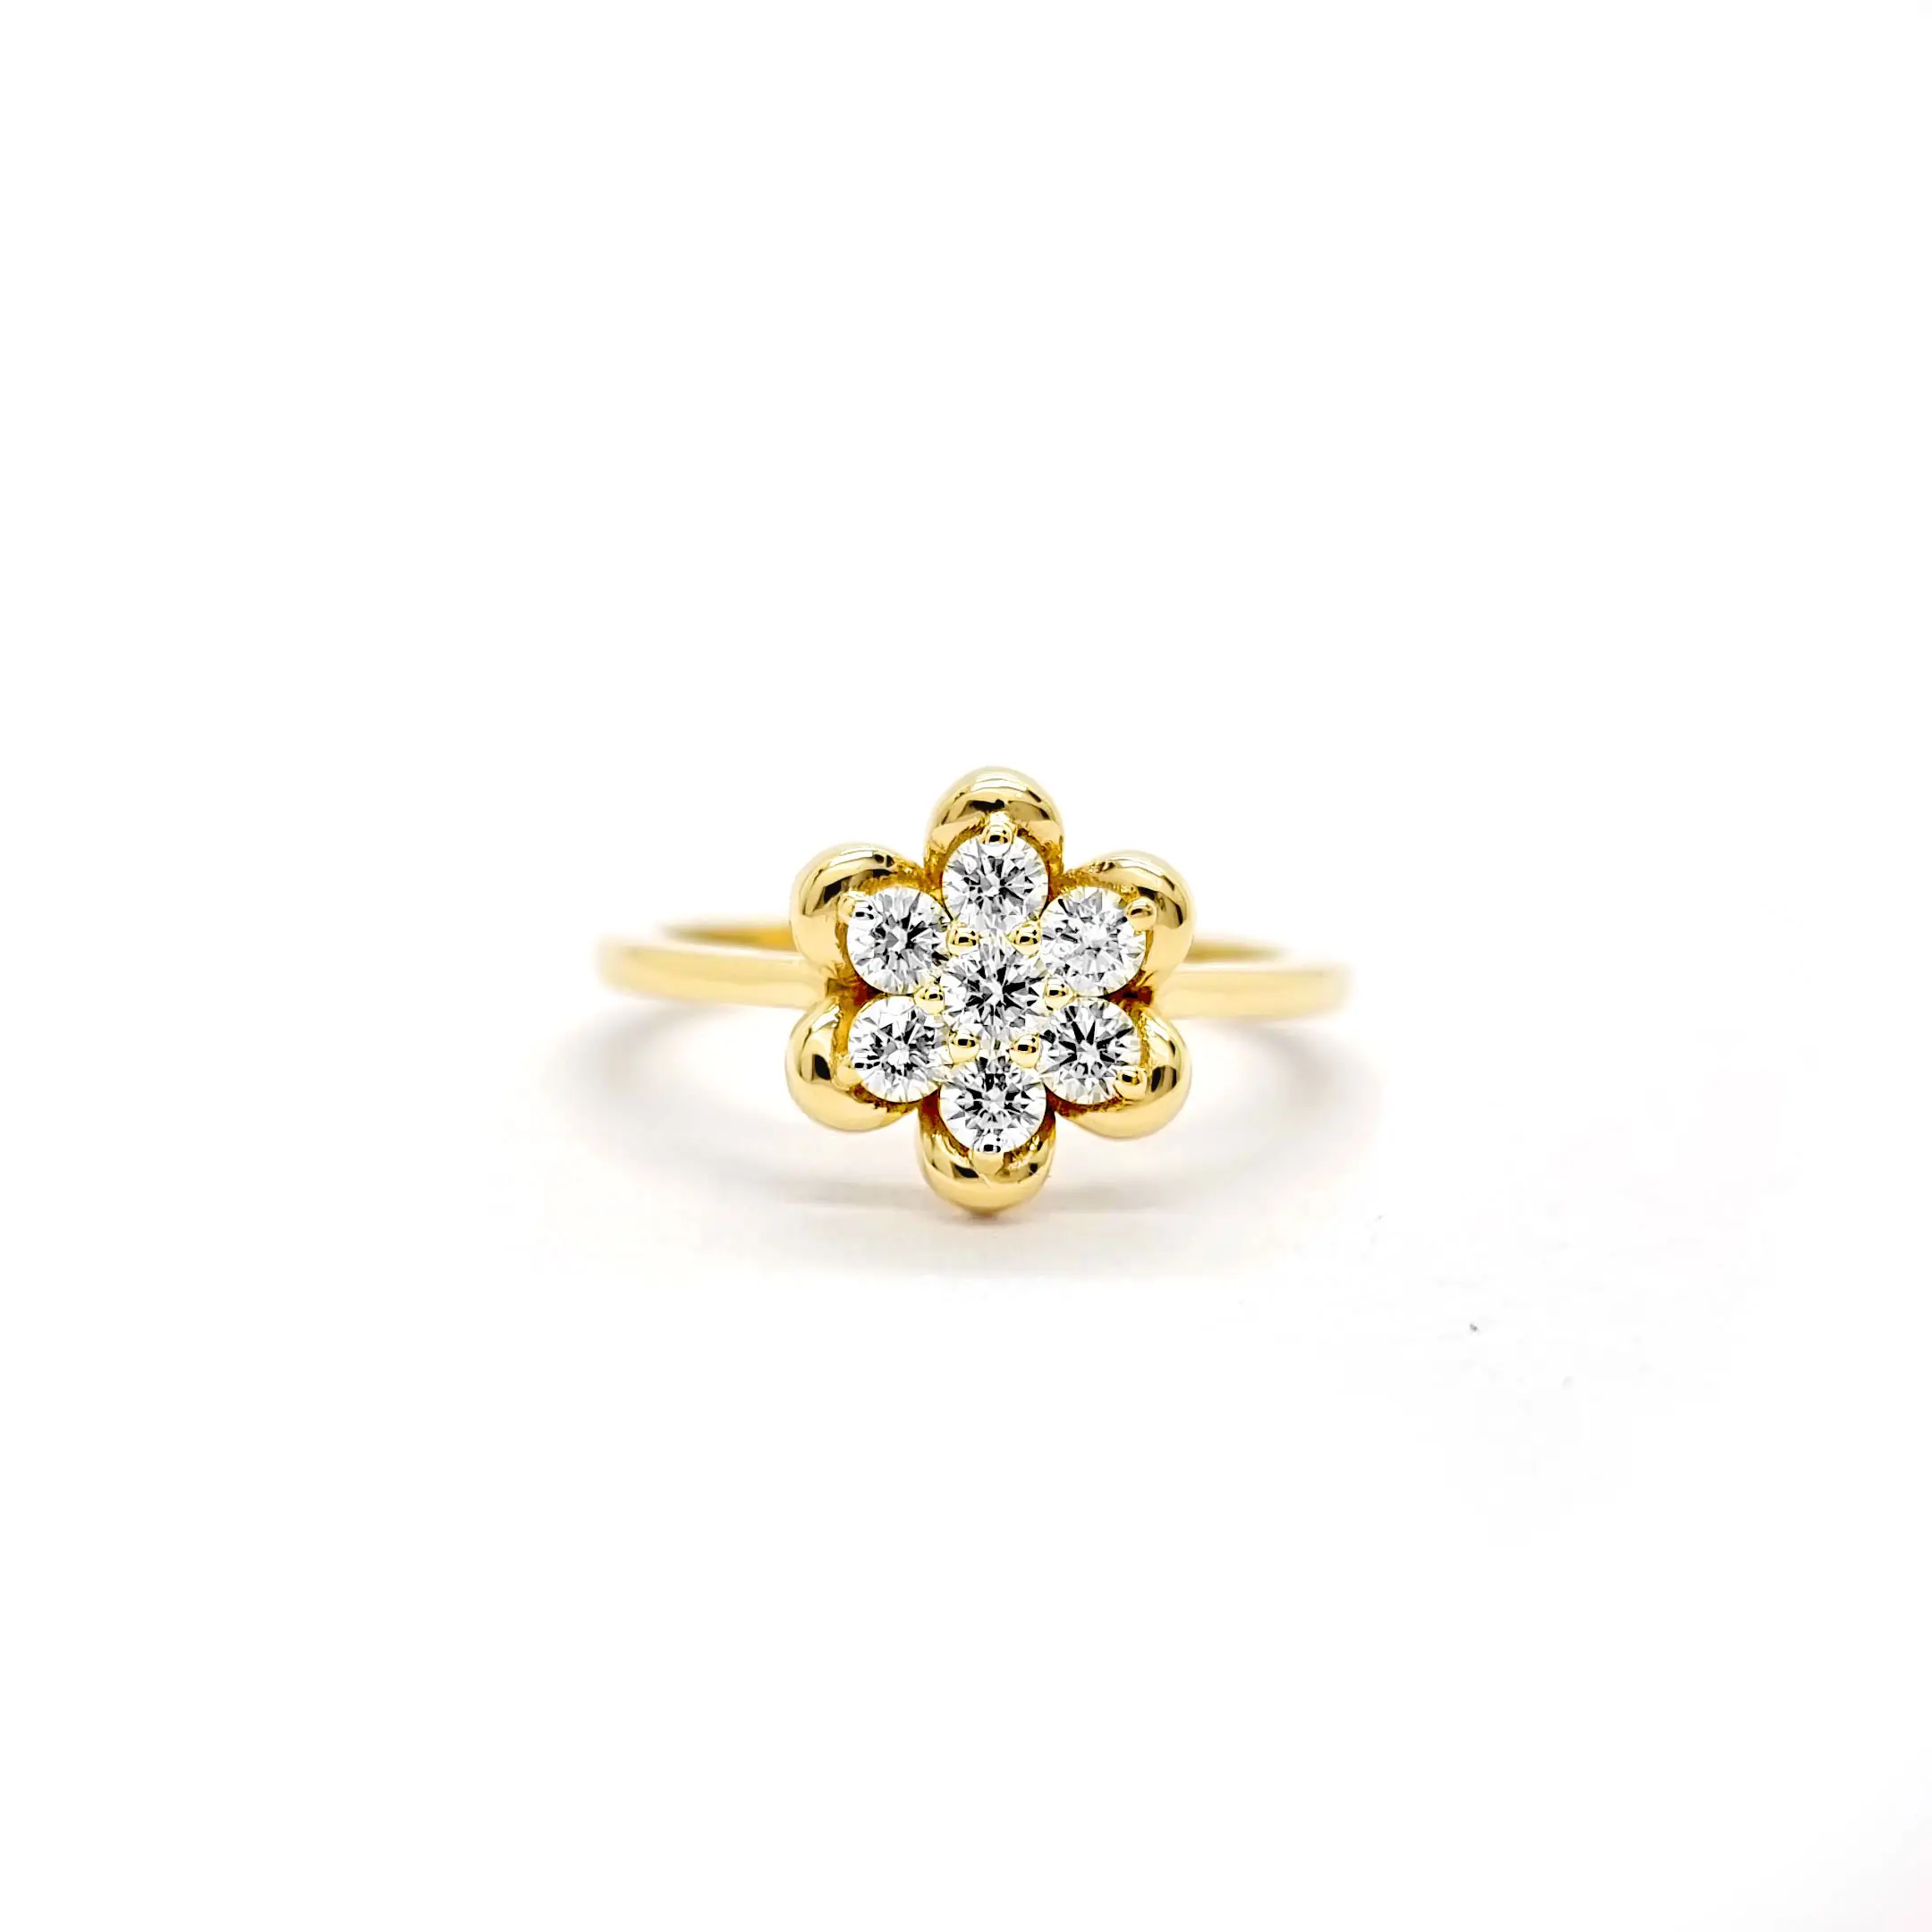 Best Selling VVS Natural Diamond Statement Ring with Floral Designed 14K Hallmarked Ring For Sale By Indian Exporters